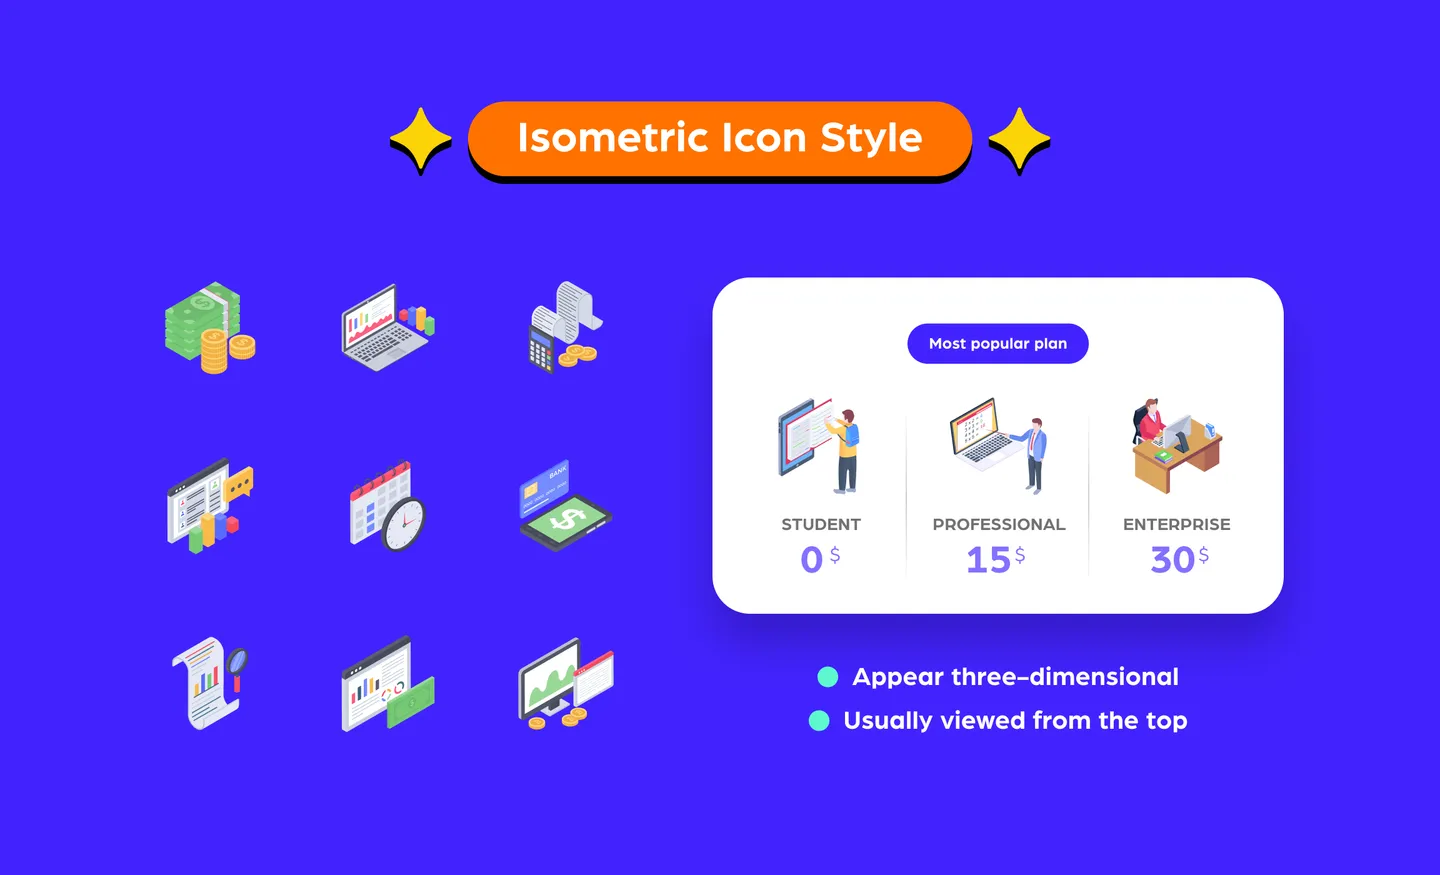 A guide to the isometric icon style